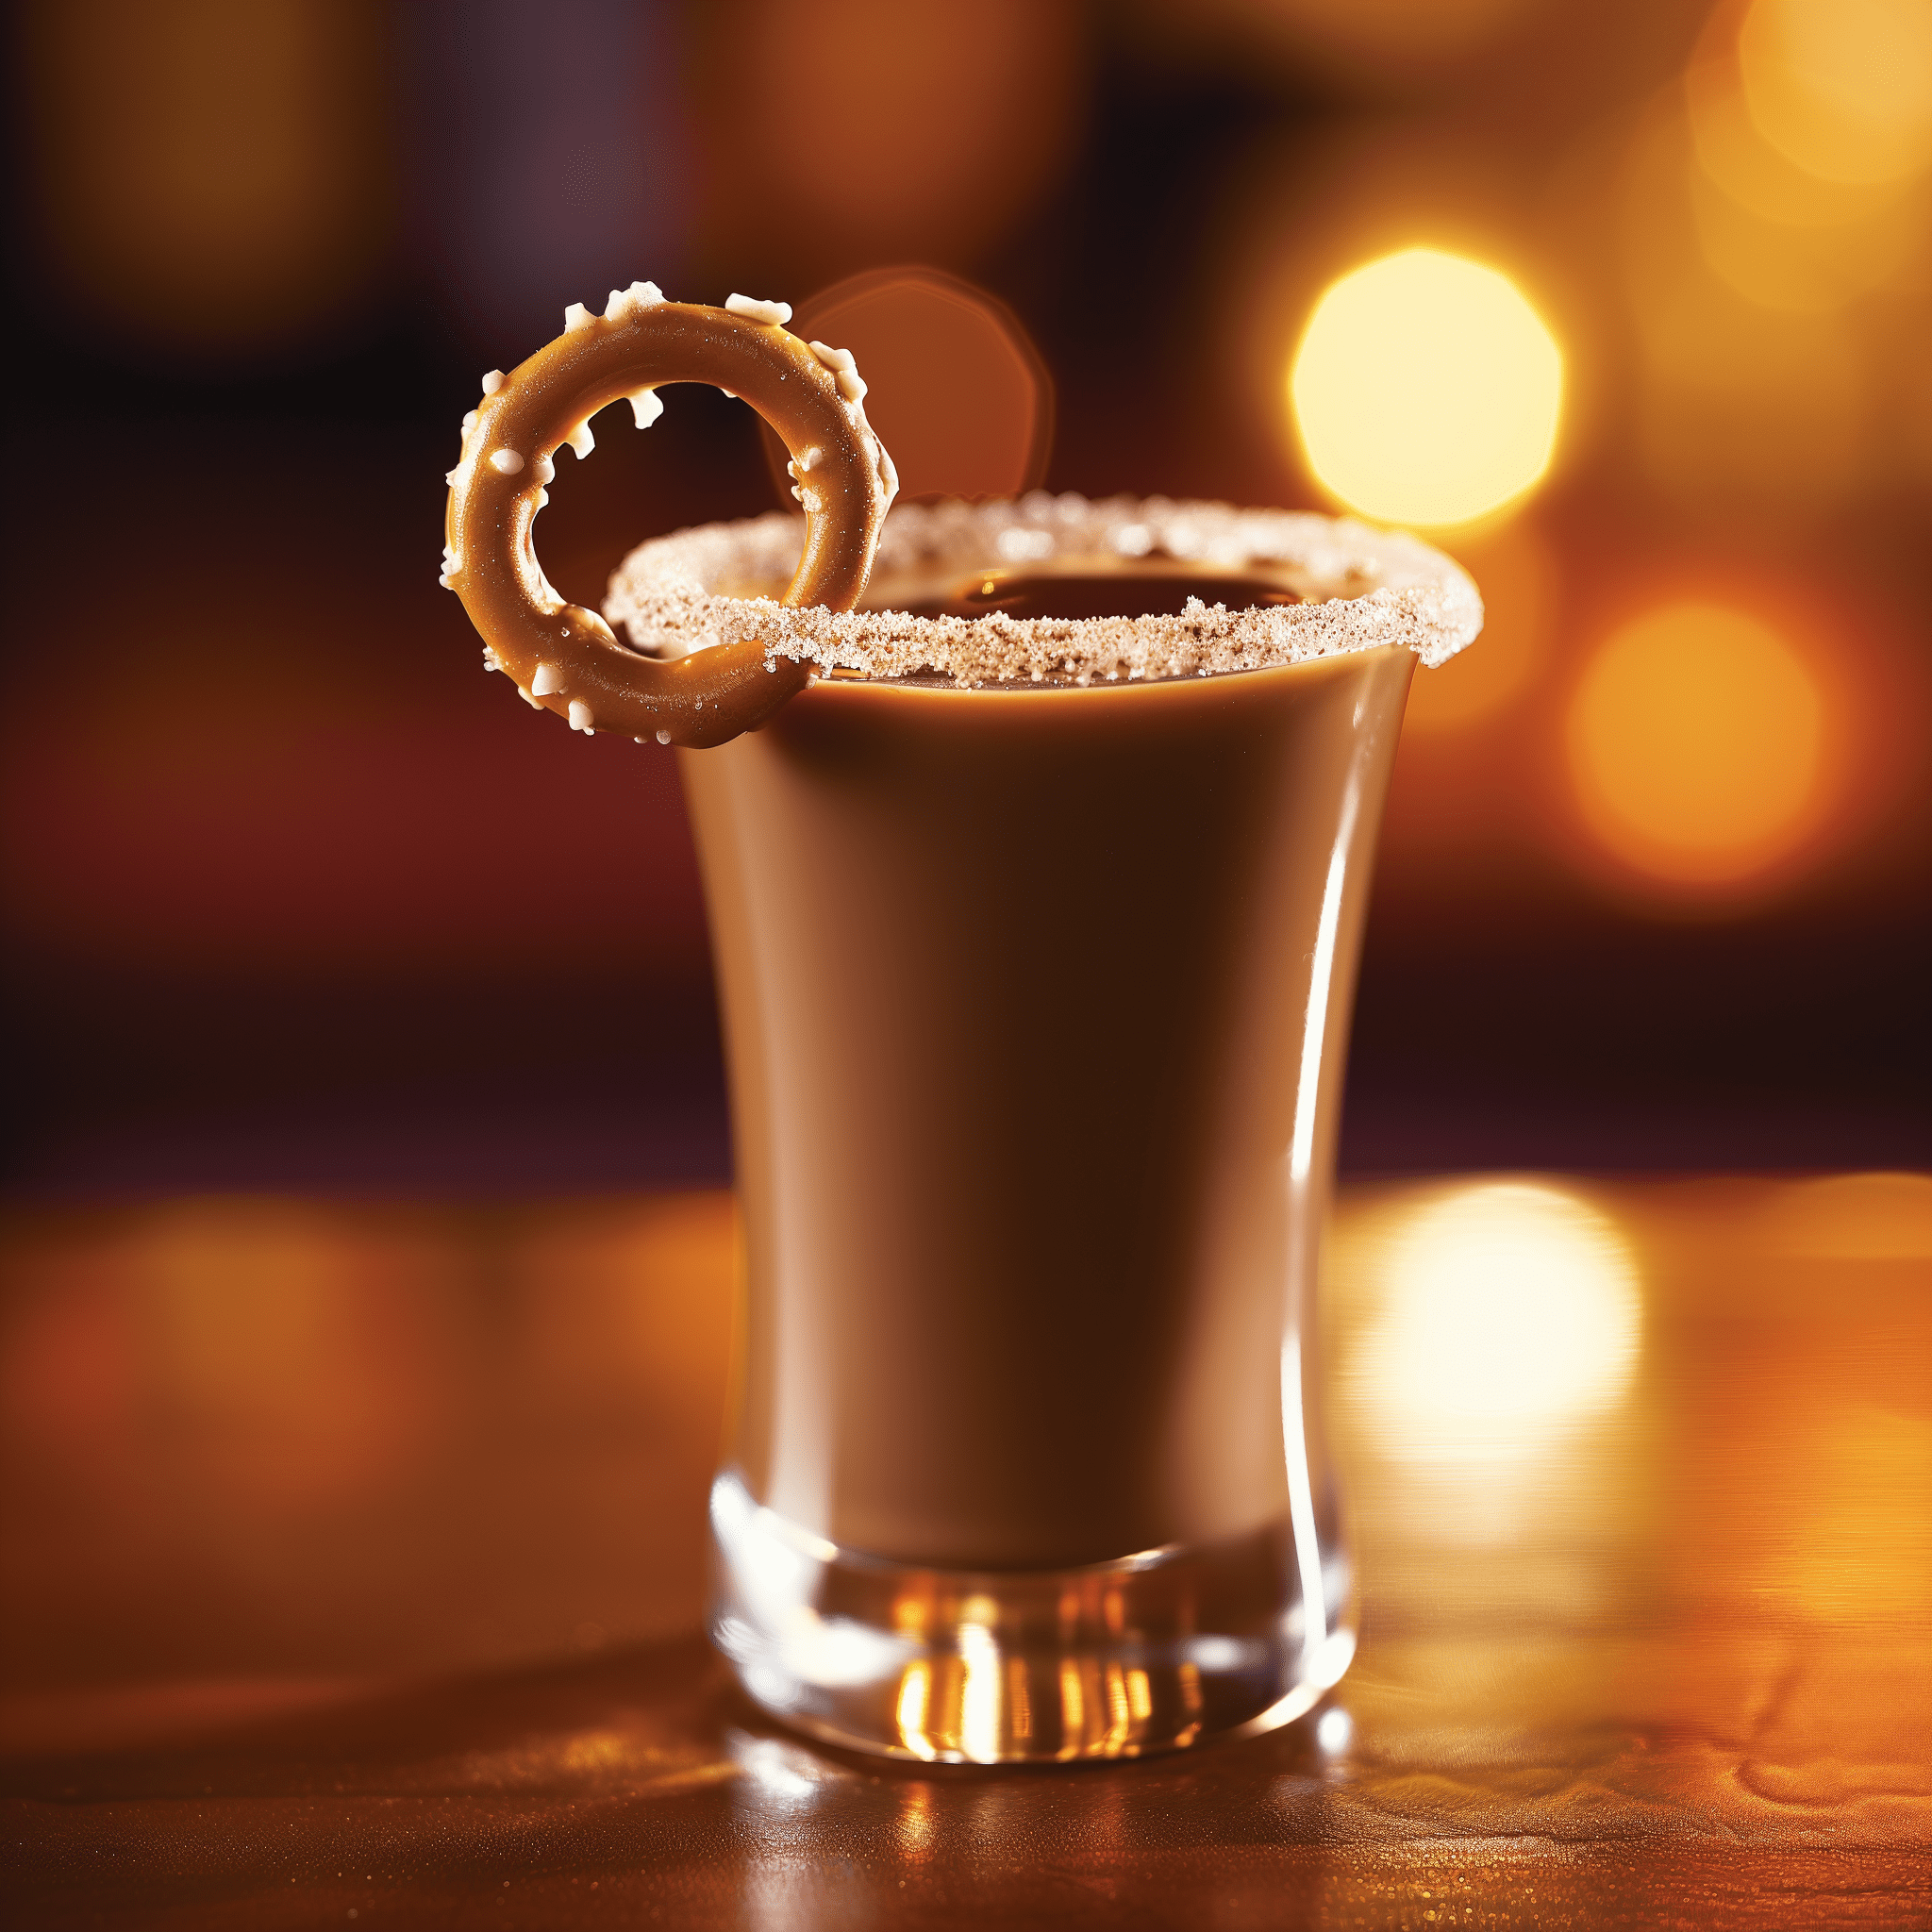 Chocolate Covered Pretzel Recipe - The Chocolate Covered Pretzel shot is a delightful blend of sweet and creamy with a hint of nuttiness from the hazelnut liqueur. The salted rim provides a savory contrast that mimics the experience of eating an actual chocolate-covered pretzel.